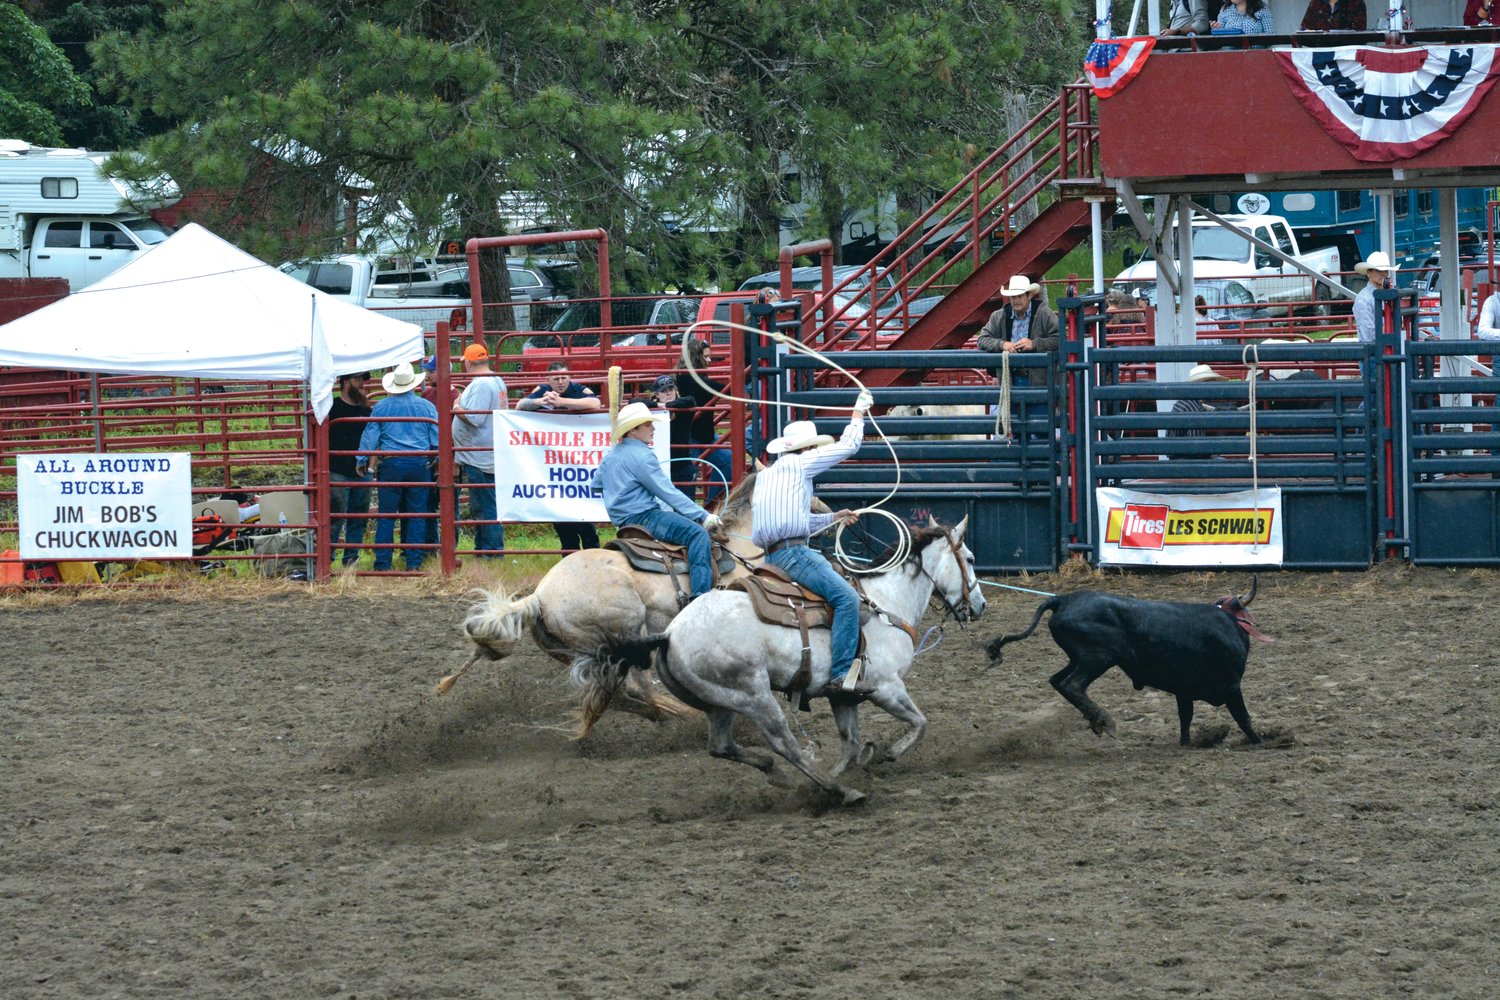 A cowboy prepares to throw his lasso during the team roping event on June 4 at the Roy Pioneer Rodeo.